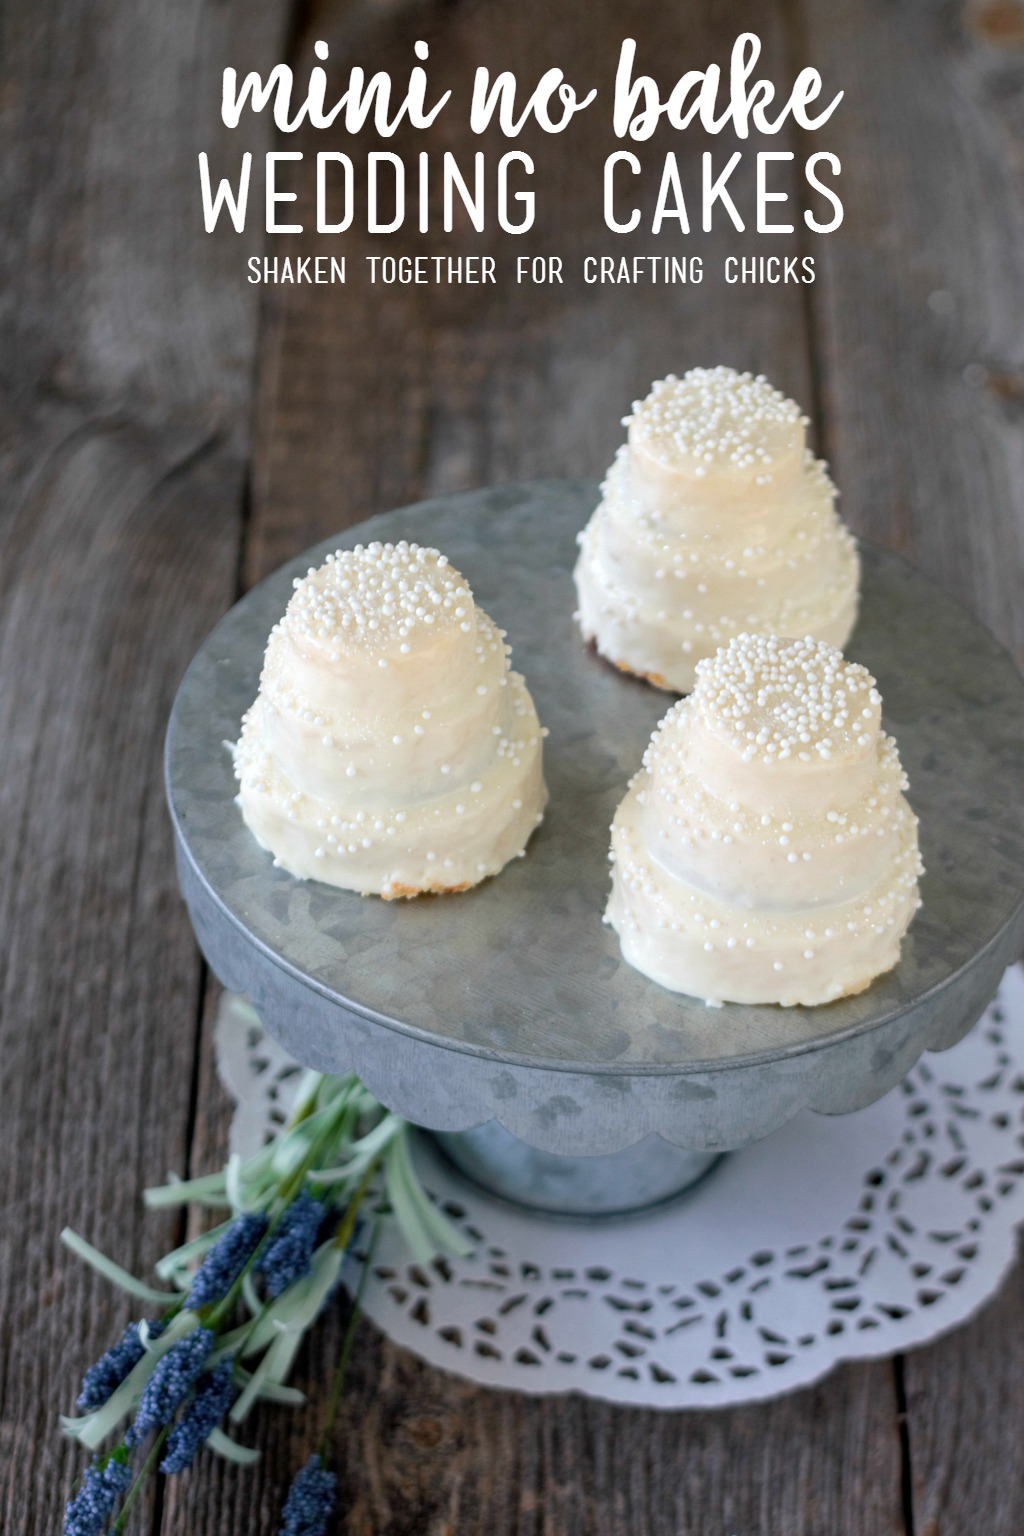 Mini No Bake Wedding Cakes - these sweet teeny tiered treats are perfect for a bridal shower, rehearsal dinner or wedding favor!